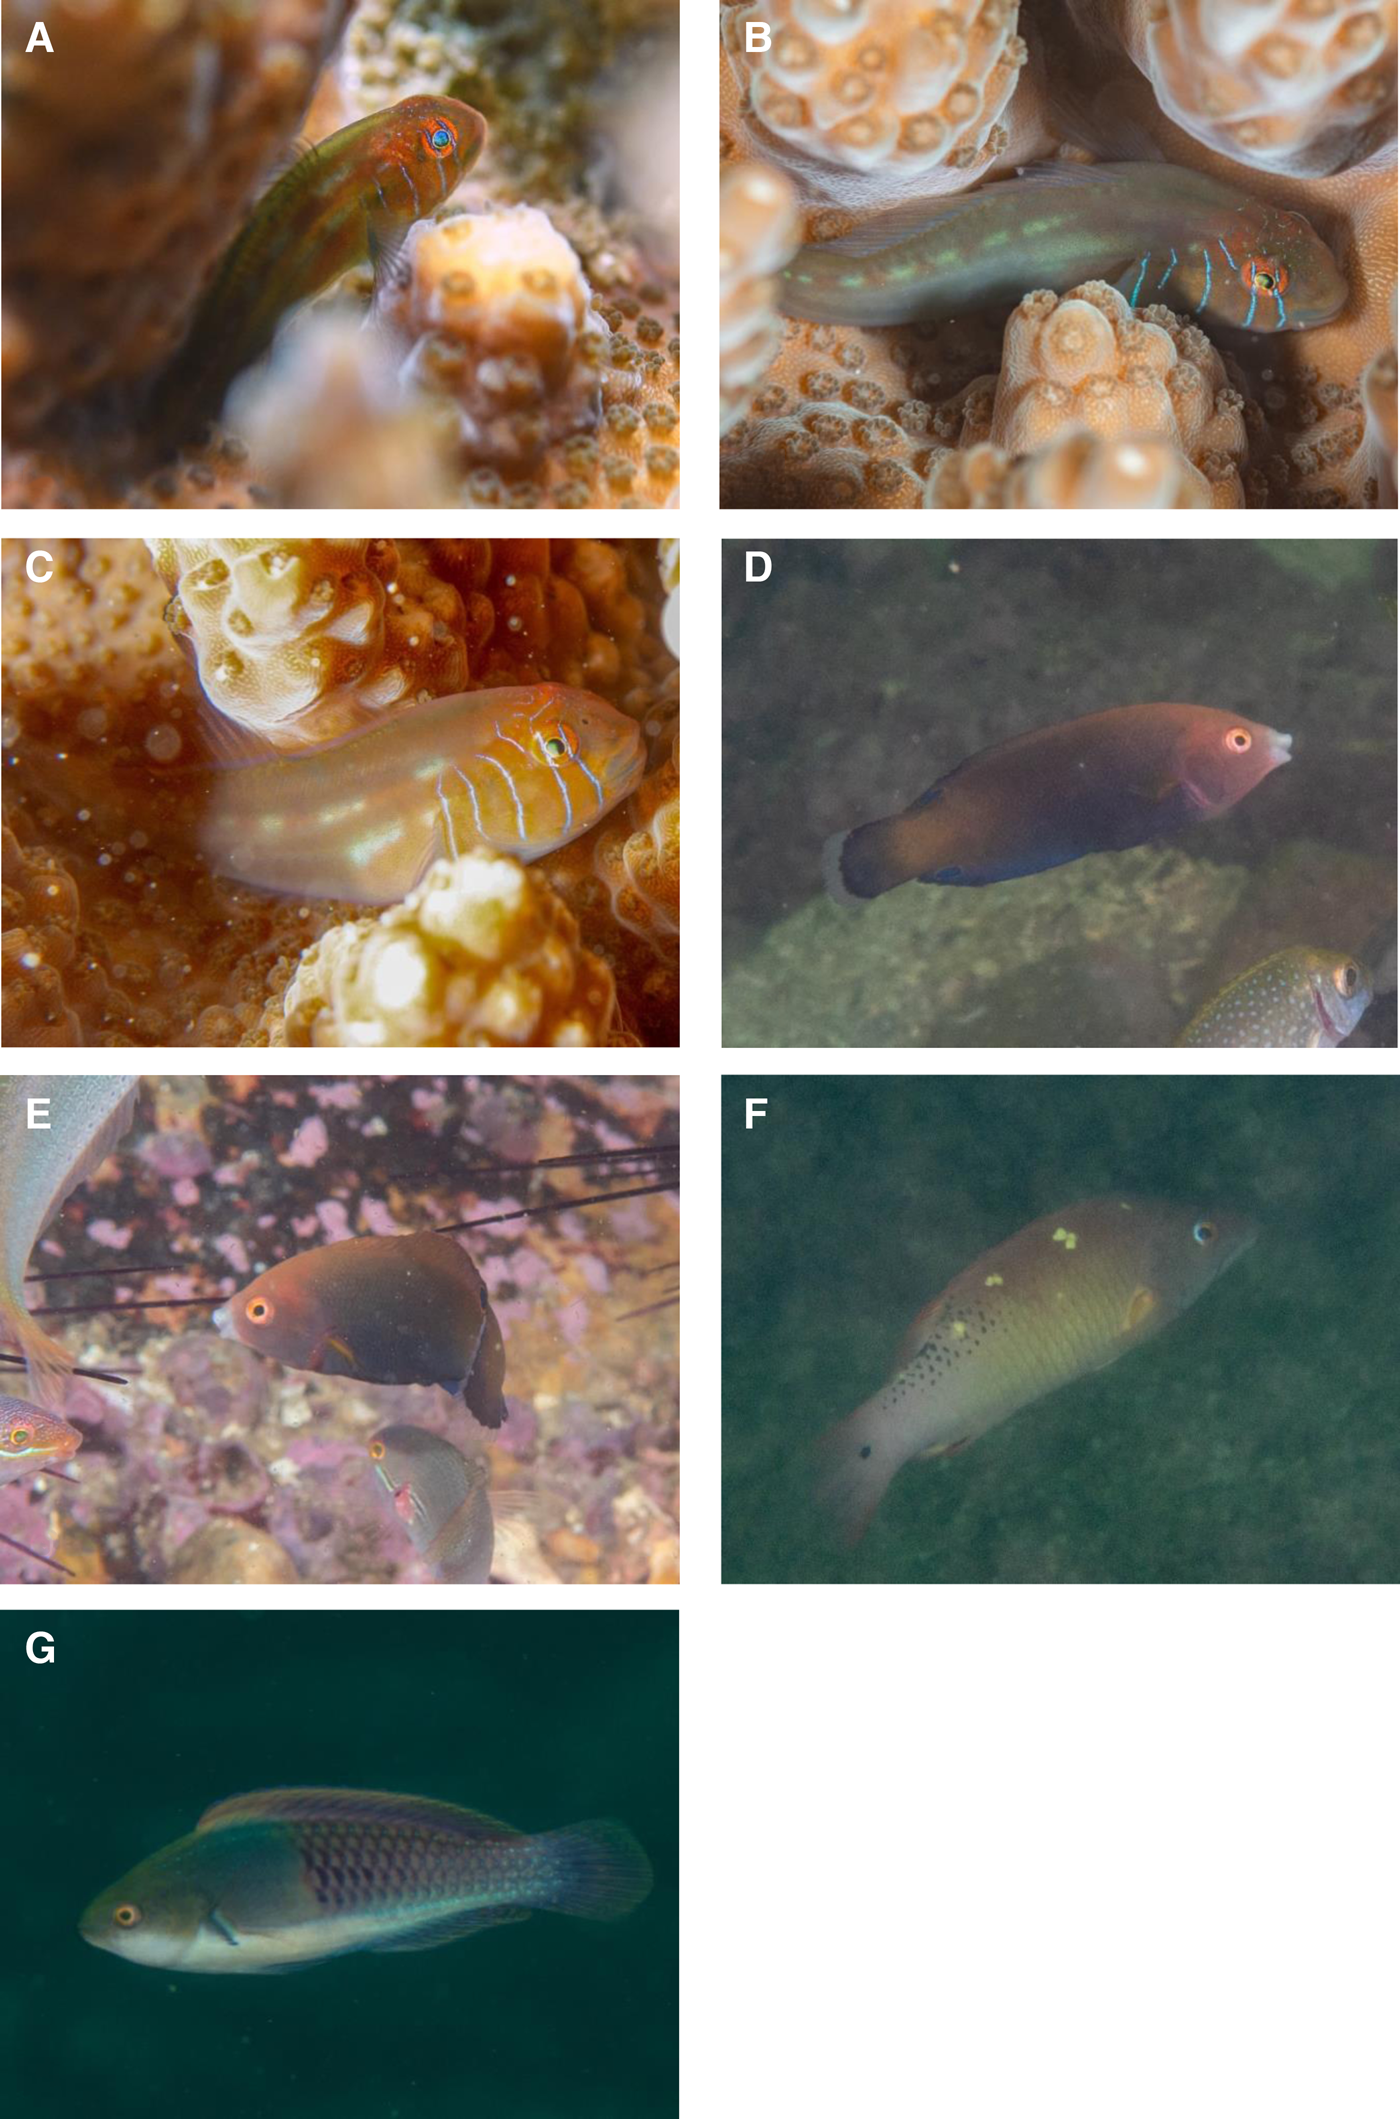 Thirty-one new records of reef fish species for Hong Kong waters